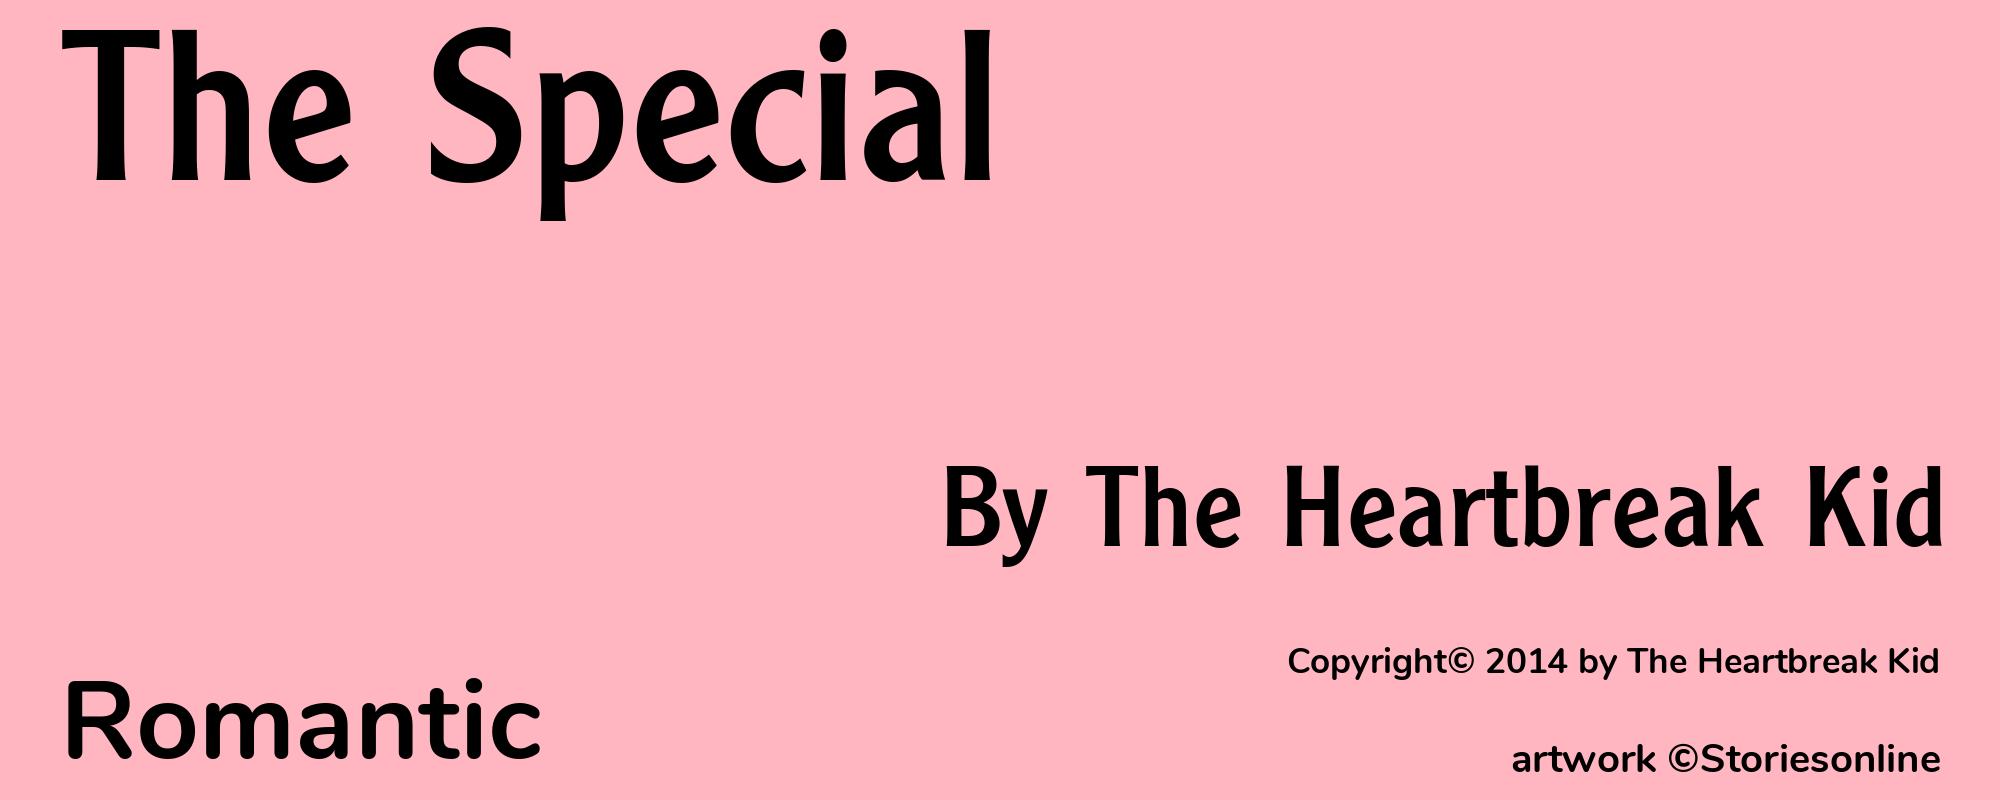 The Special - Cover